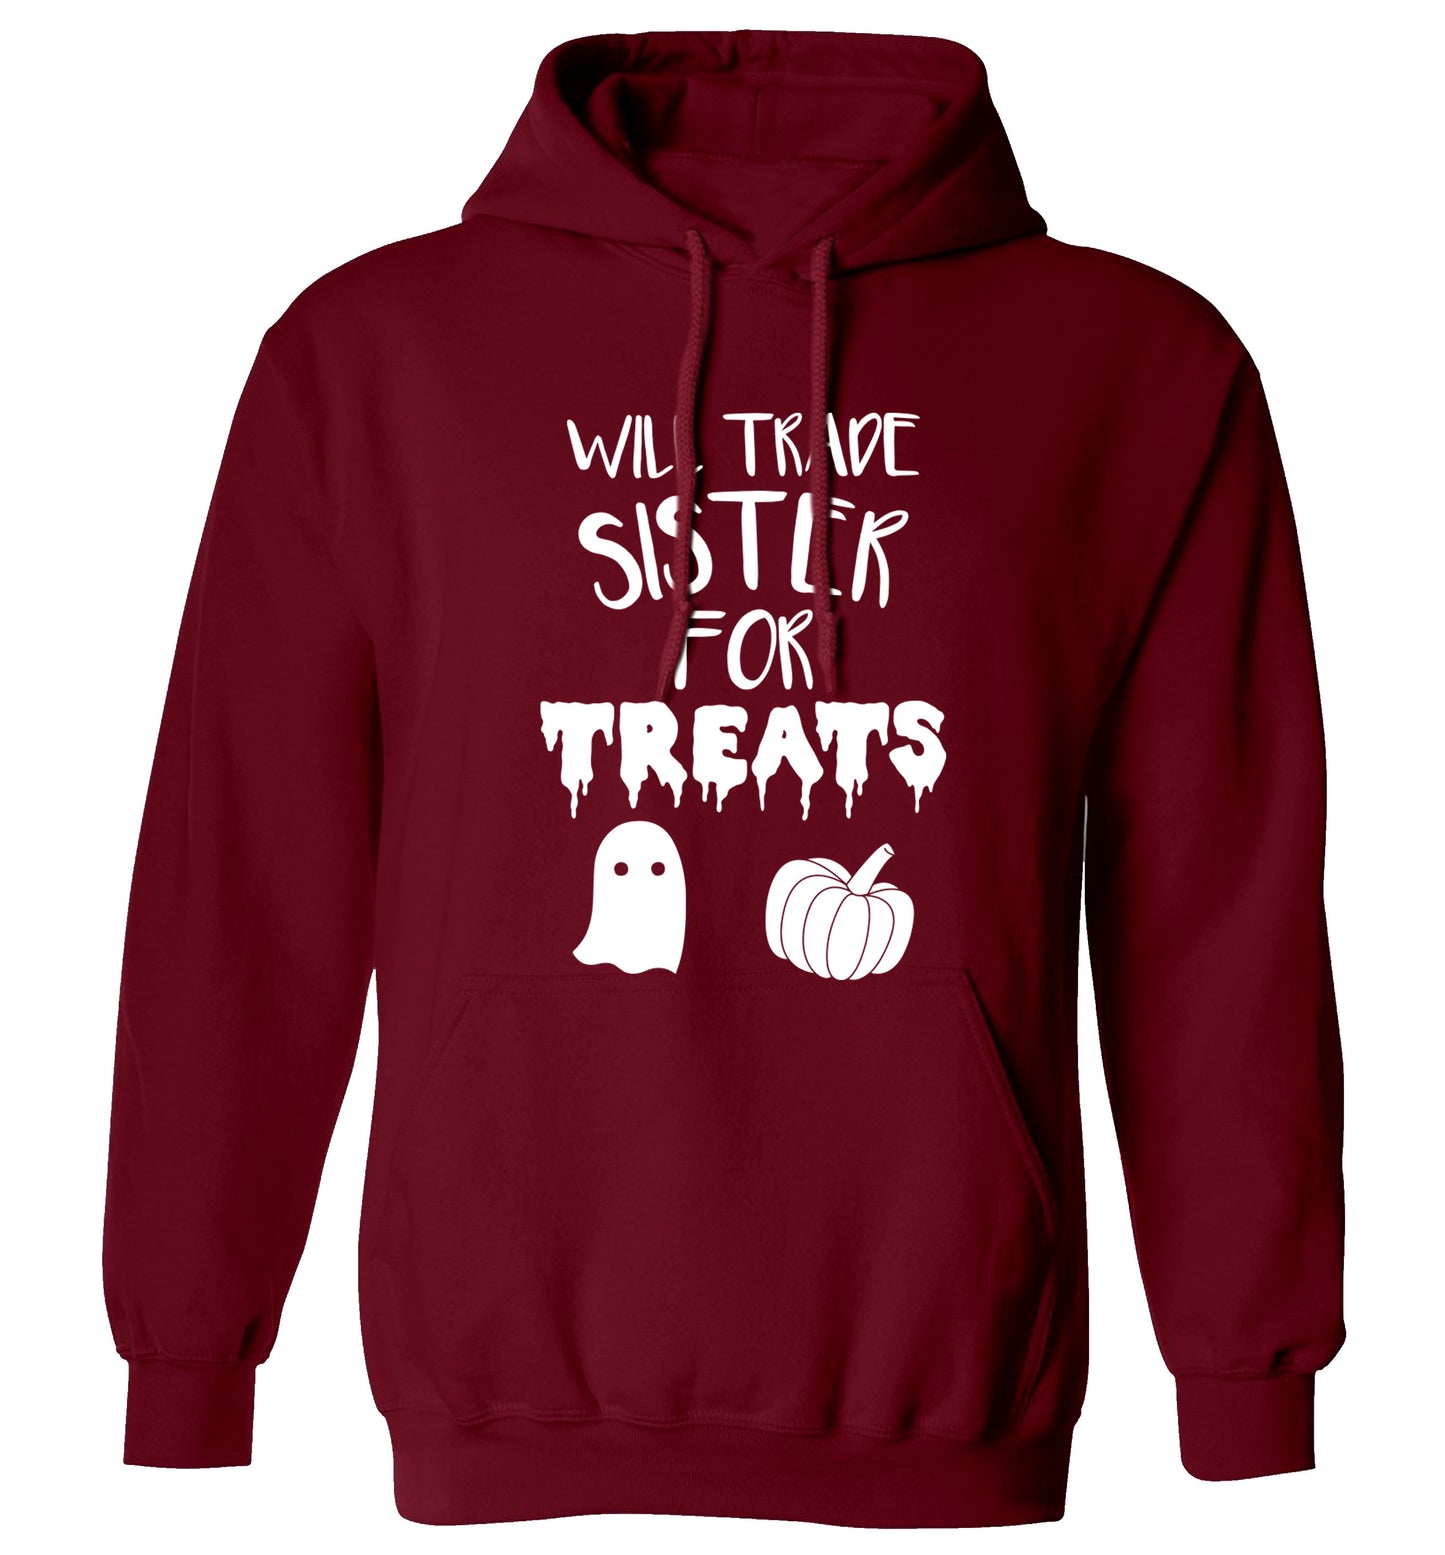 Will trade sister for treats adults unisex maroon hoodie 2XL